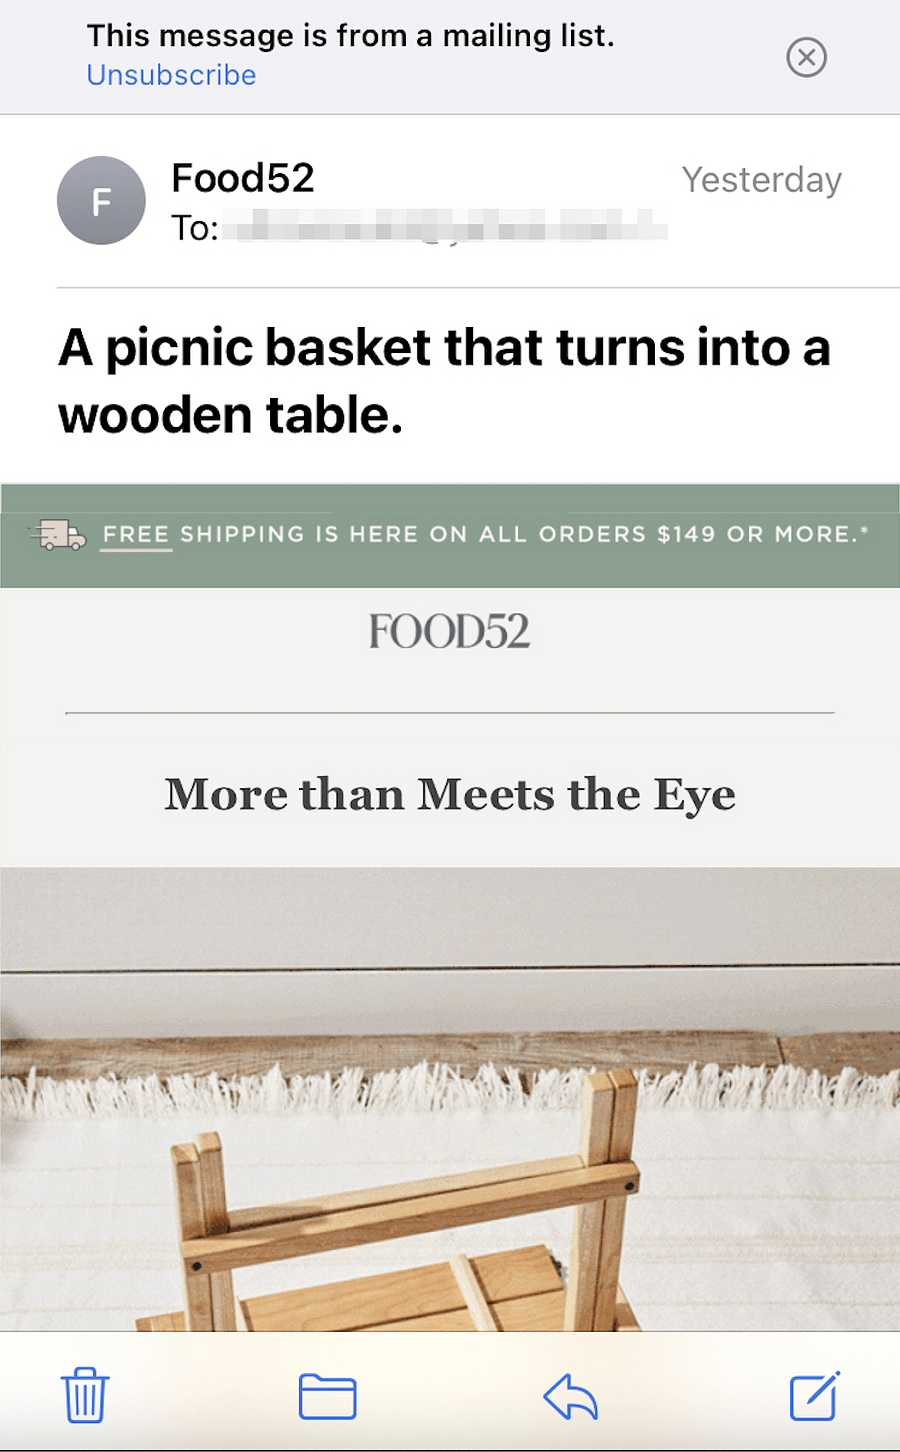 A picnic basket that turns into a wooden table